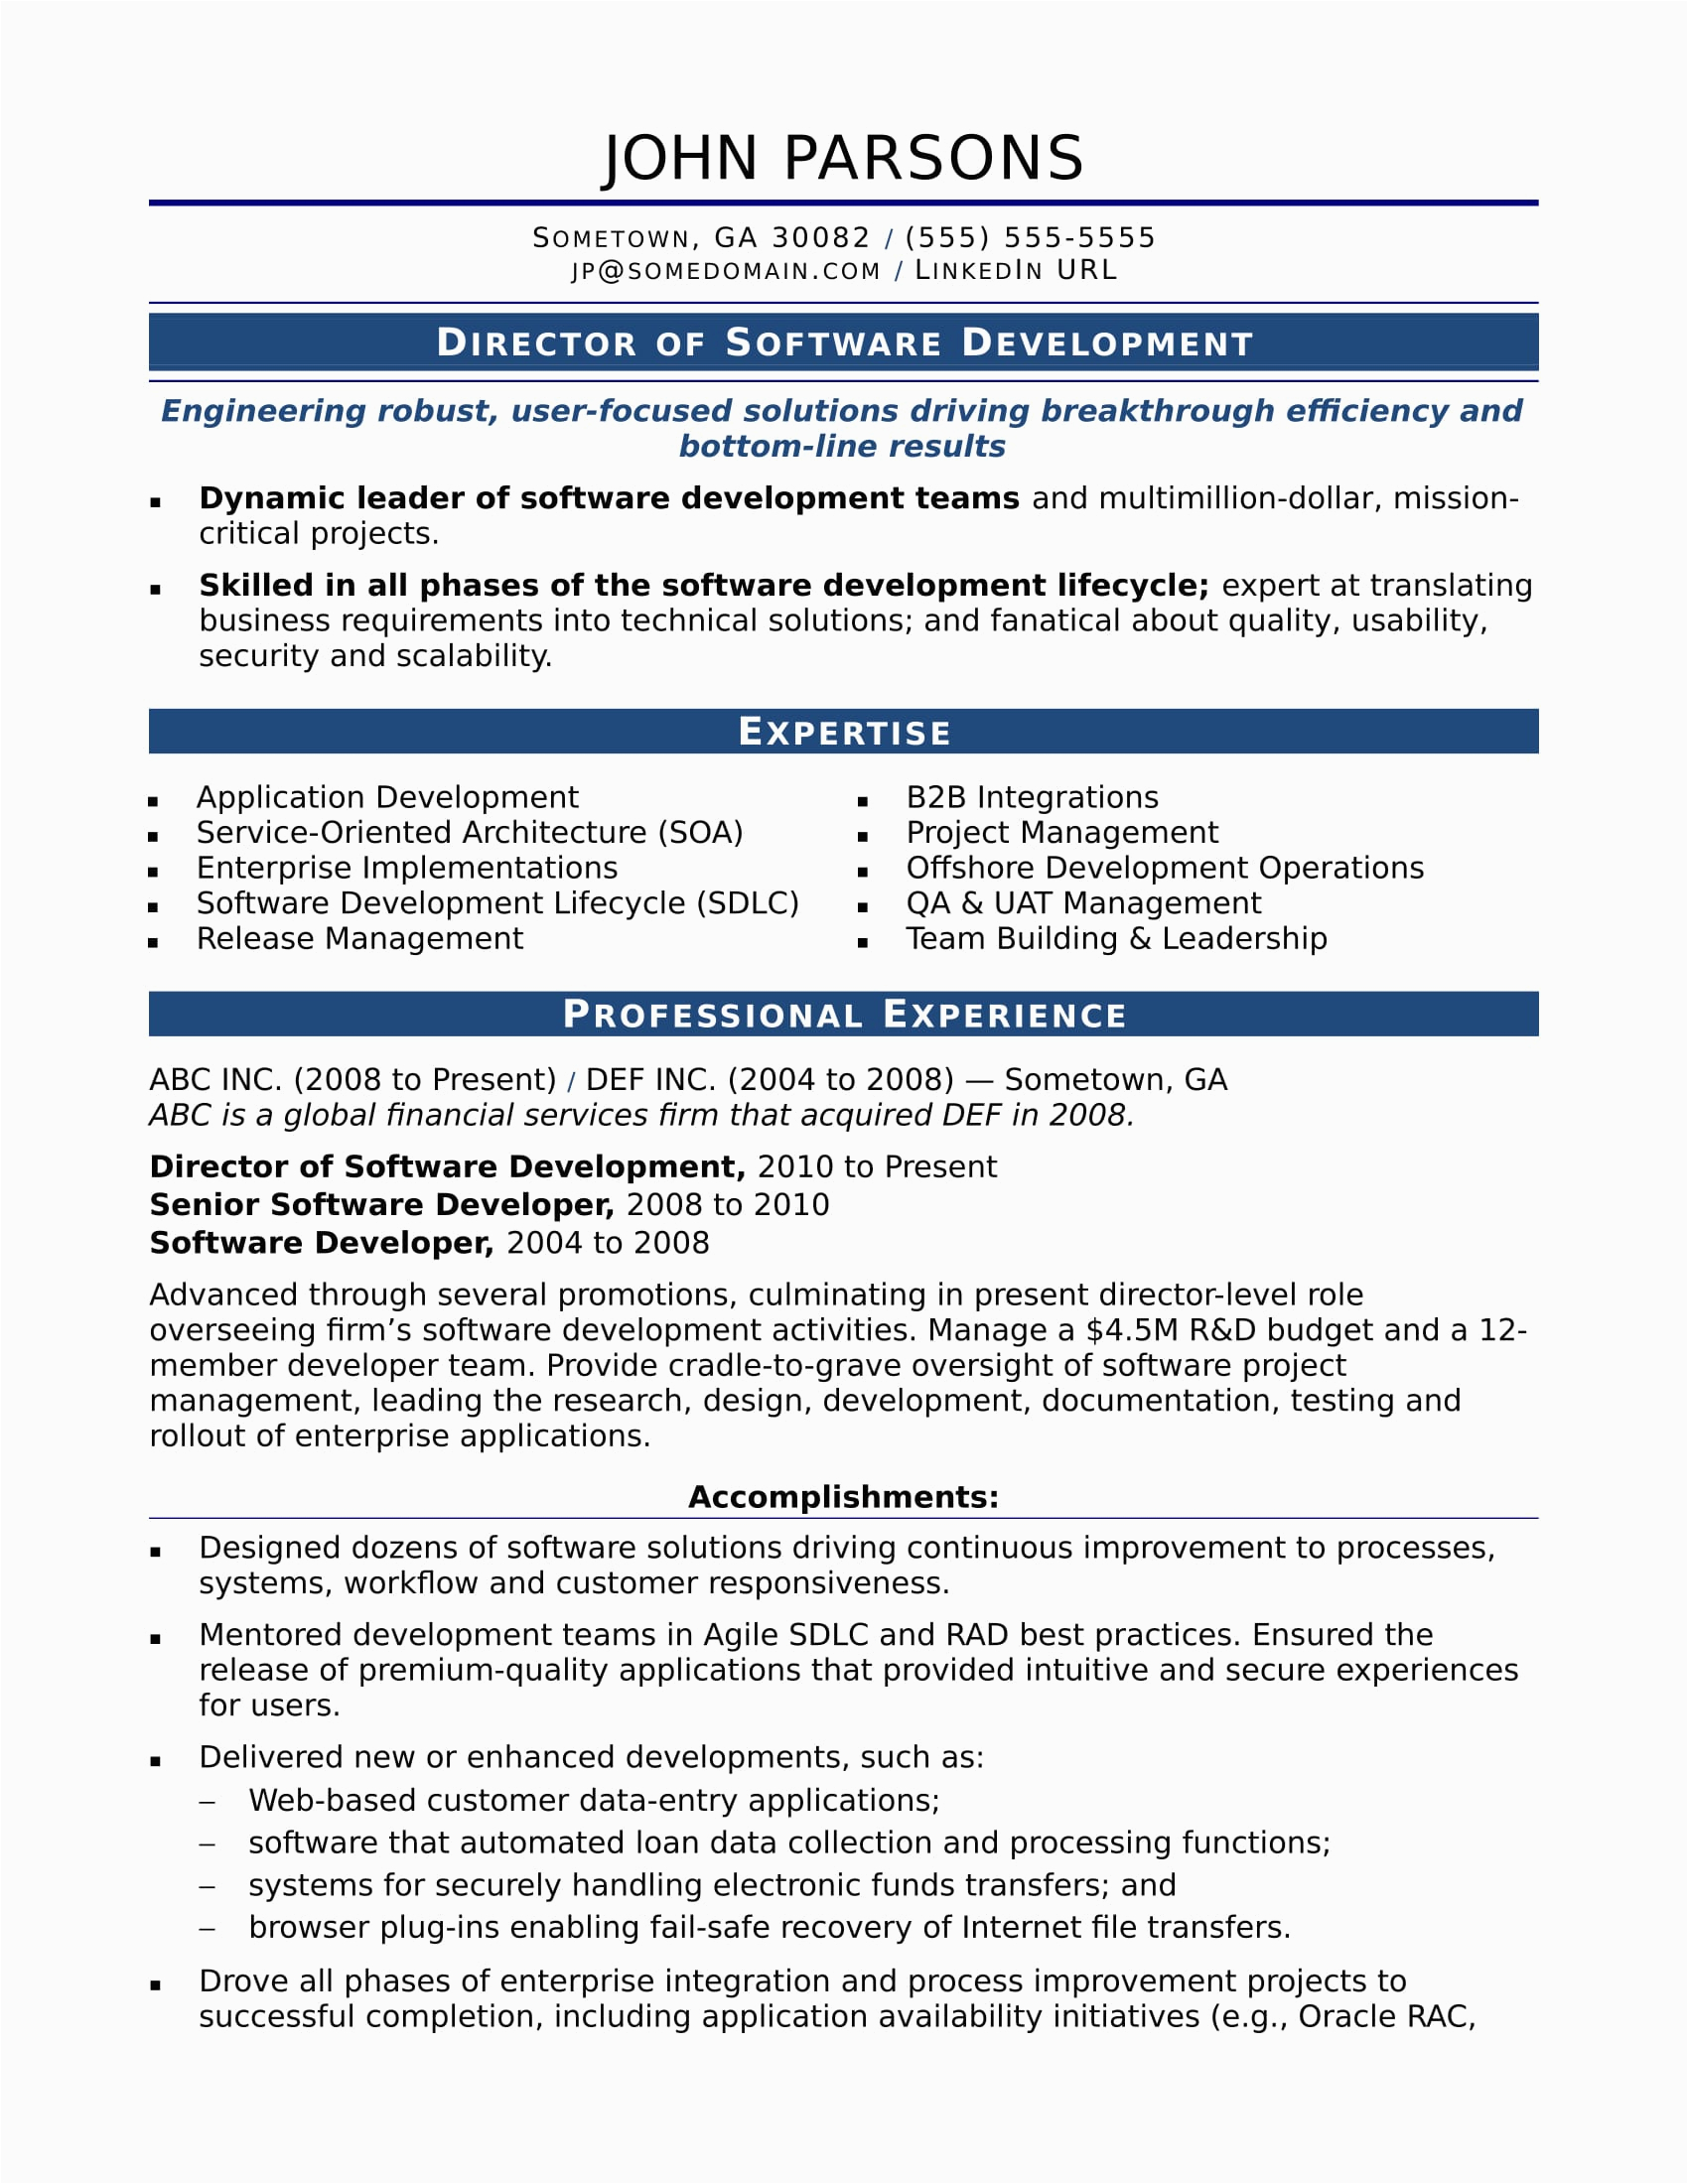 Resume Objective Samples for Experienced Professionals Sample Resume for An Experienced It Developer